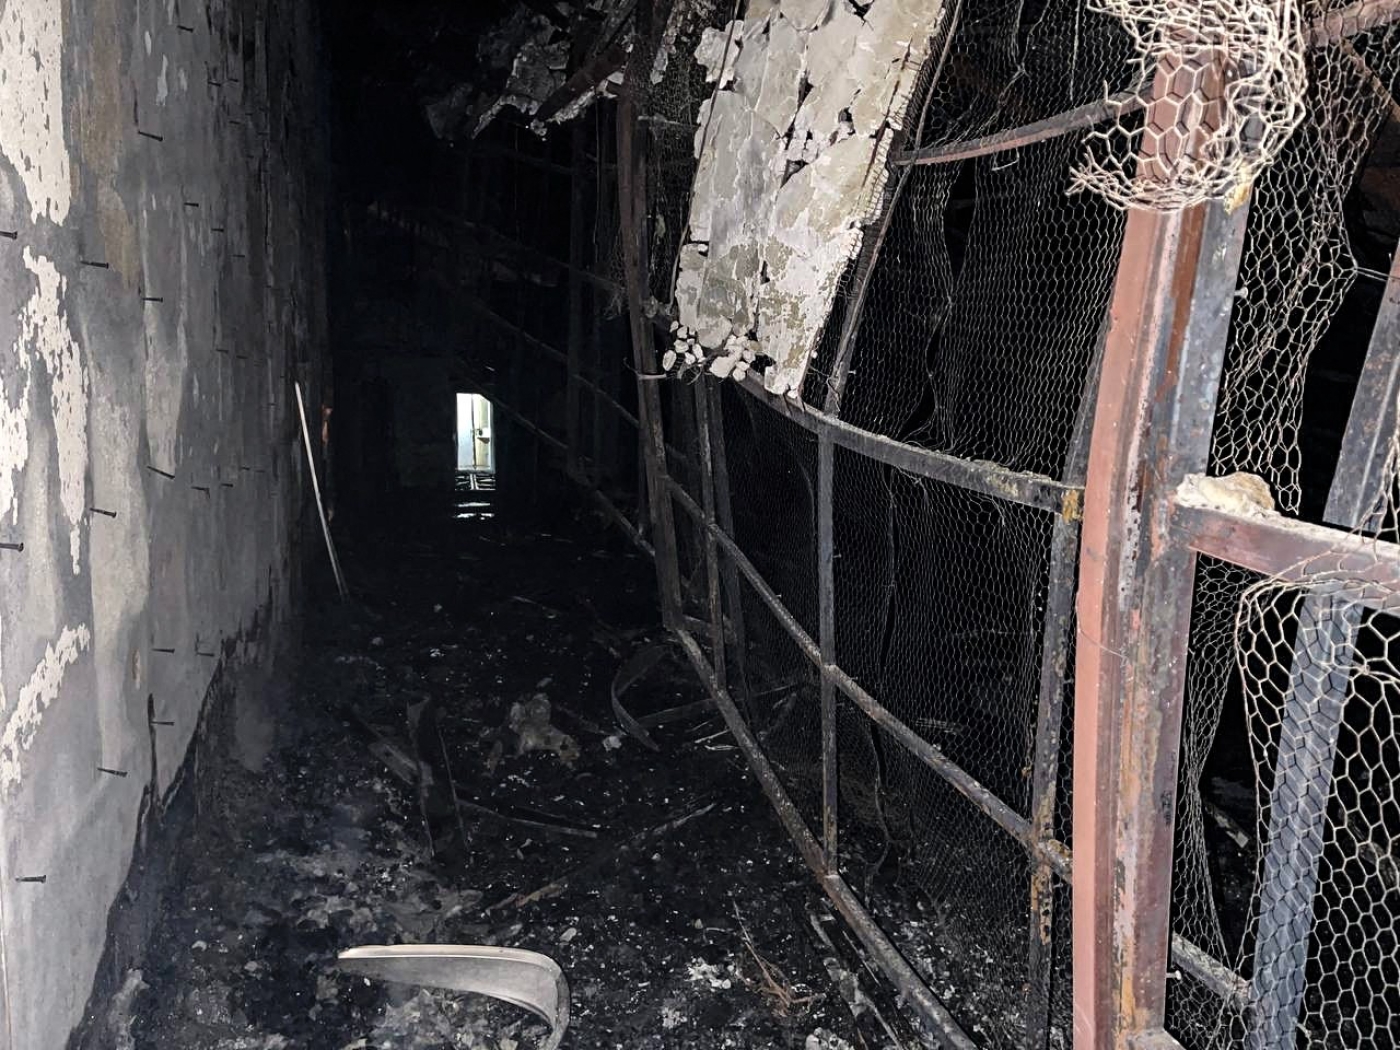 Damage caused by a fire inside the building of the Evin prison (AFP)